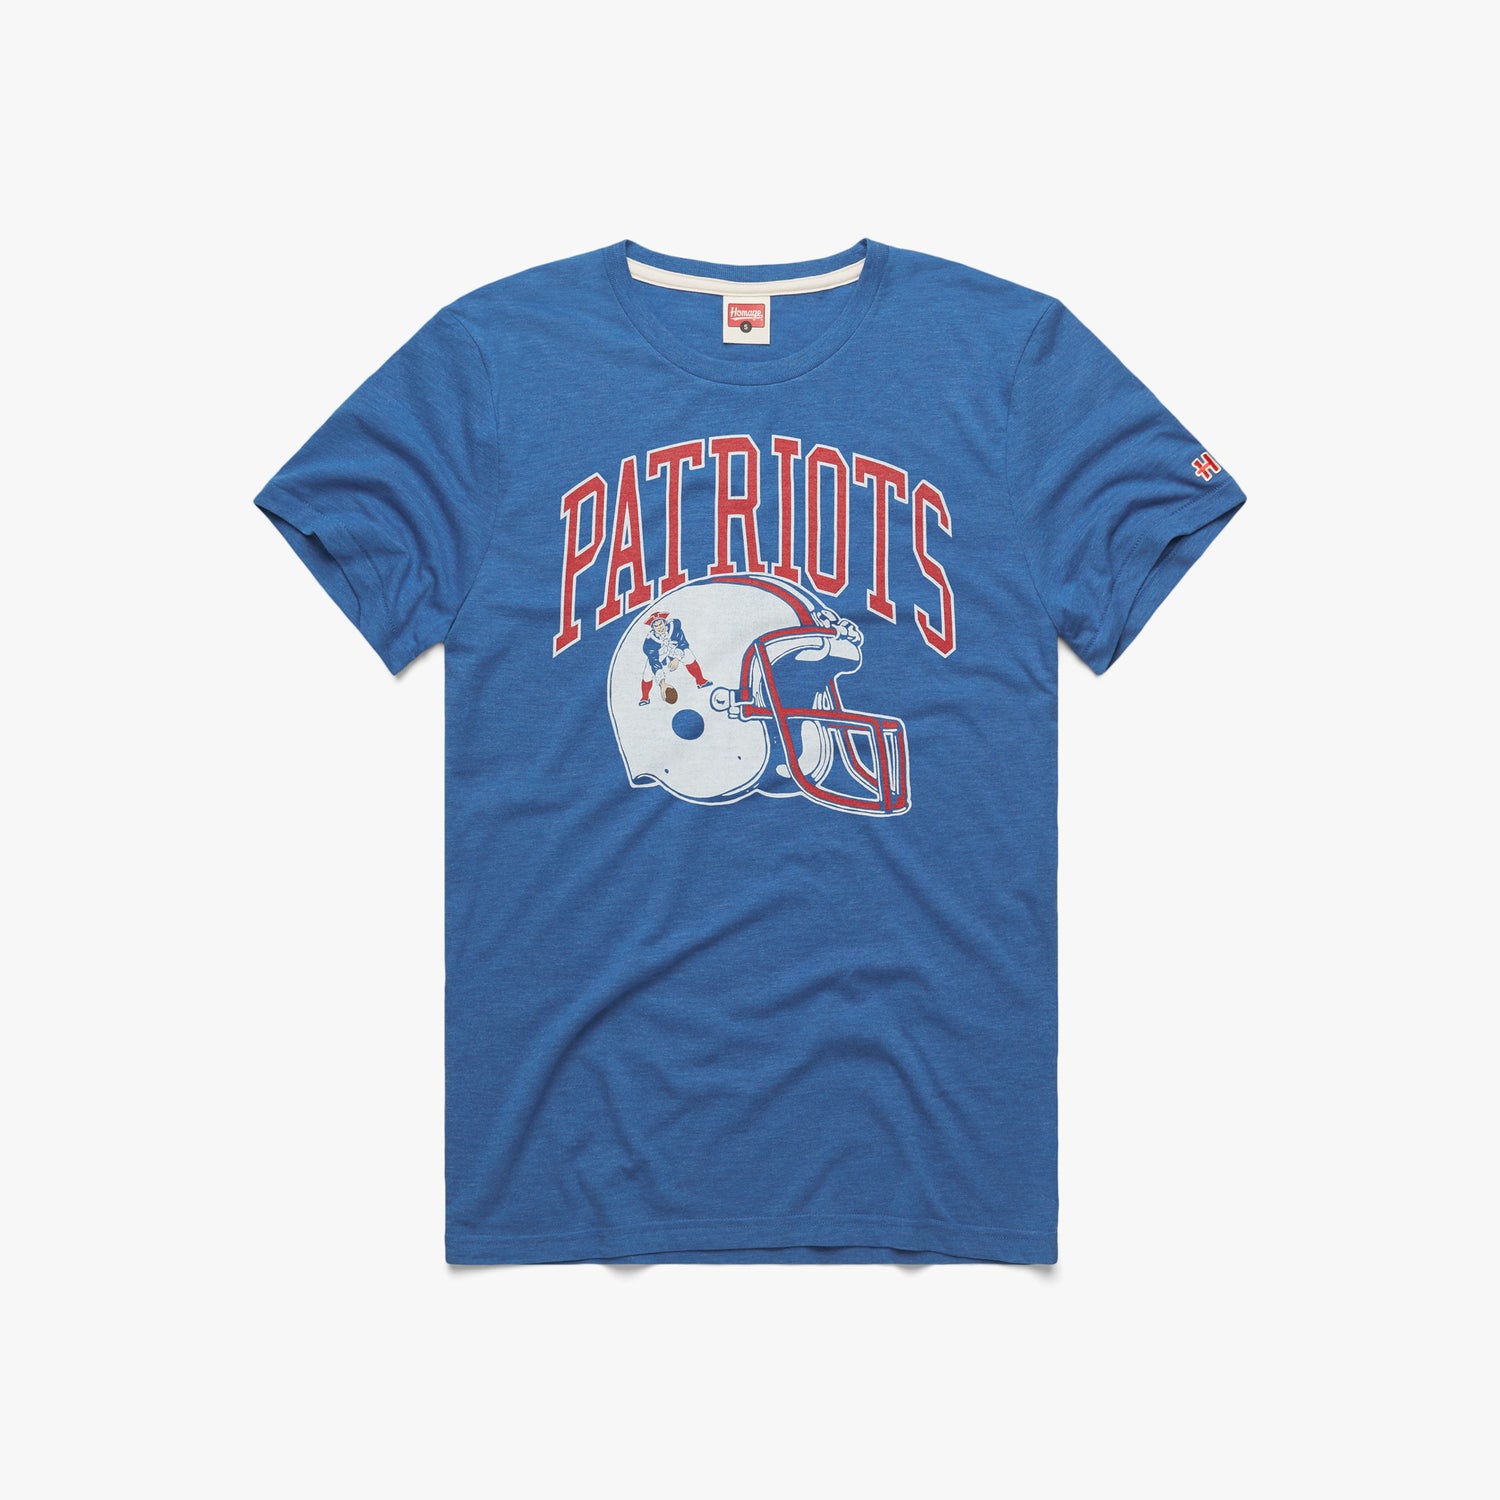 New England Patriots Helmet Retro T-Shirt from Homage. | Officially Licensed Vintage NFL Apparel from Homage Pro Shop.